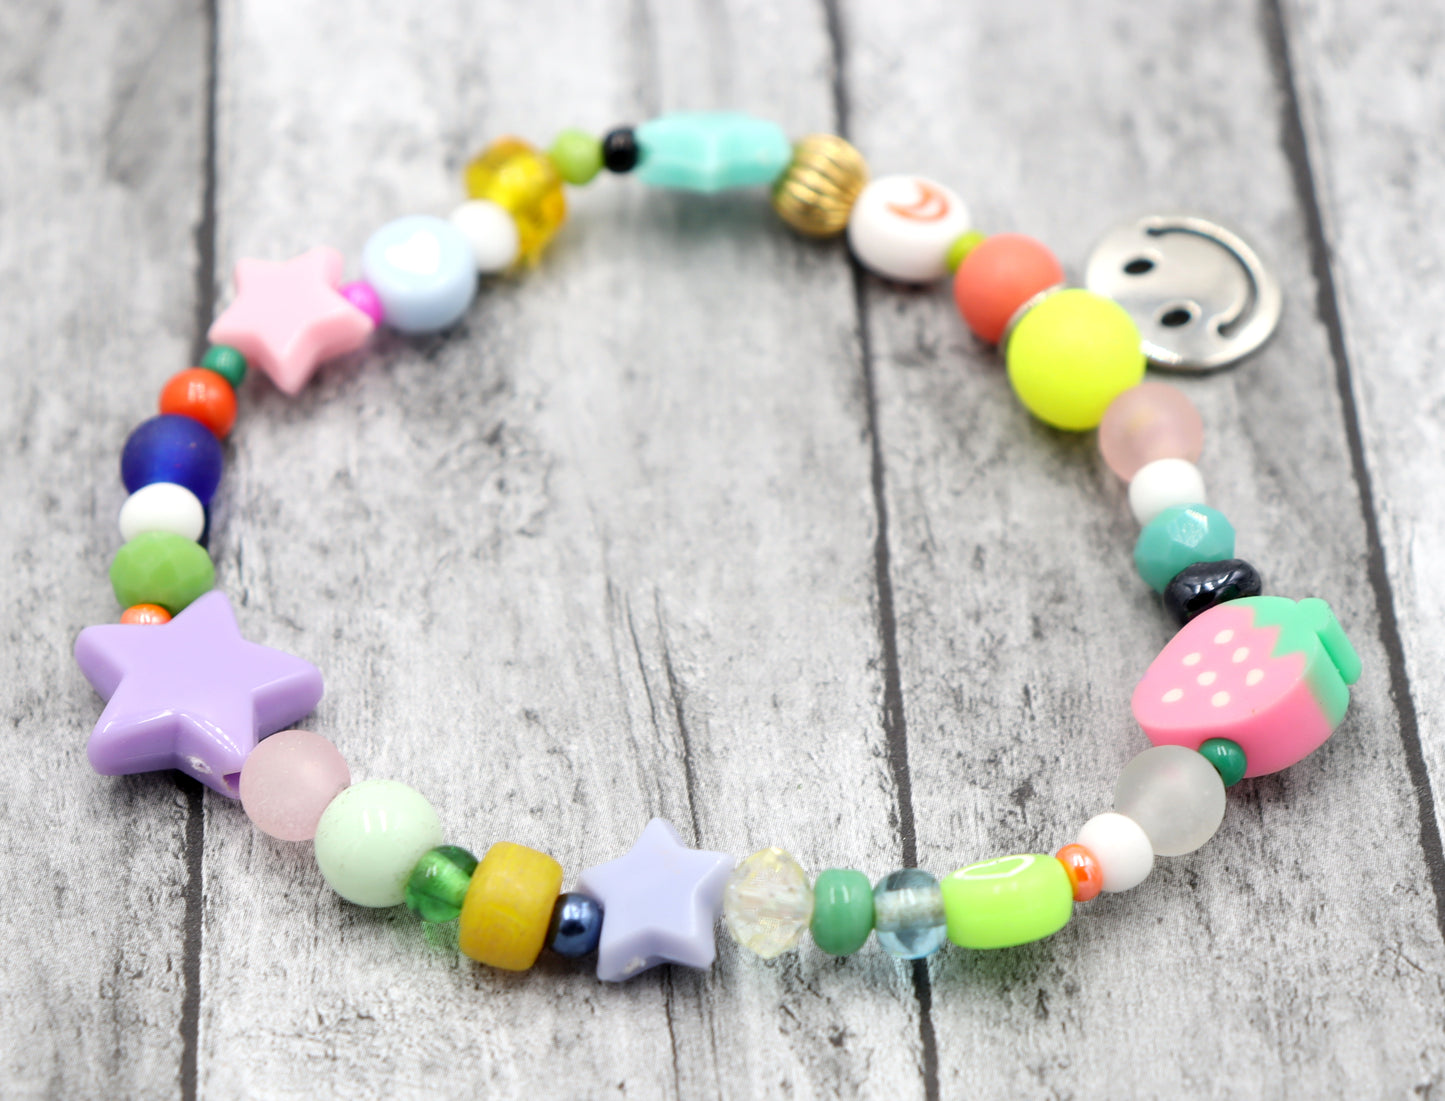 Kawaii All Things Bright and Cute All But the Kitchen Sink Fun Girlie Handmade Bracelet by Monkey's Mojo